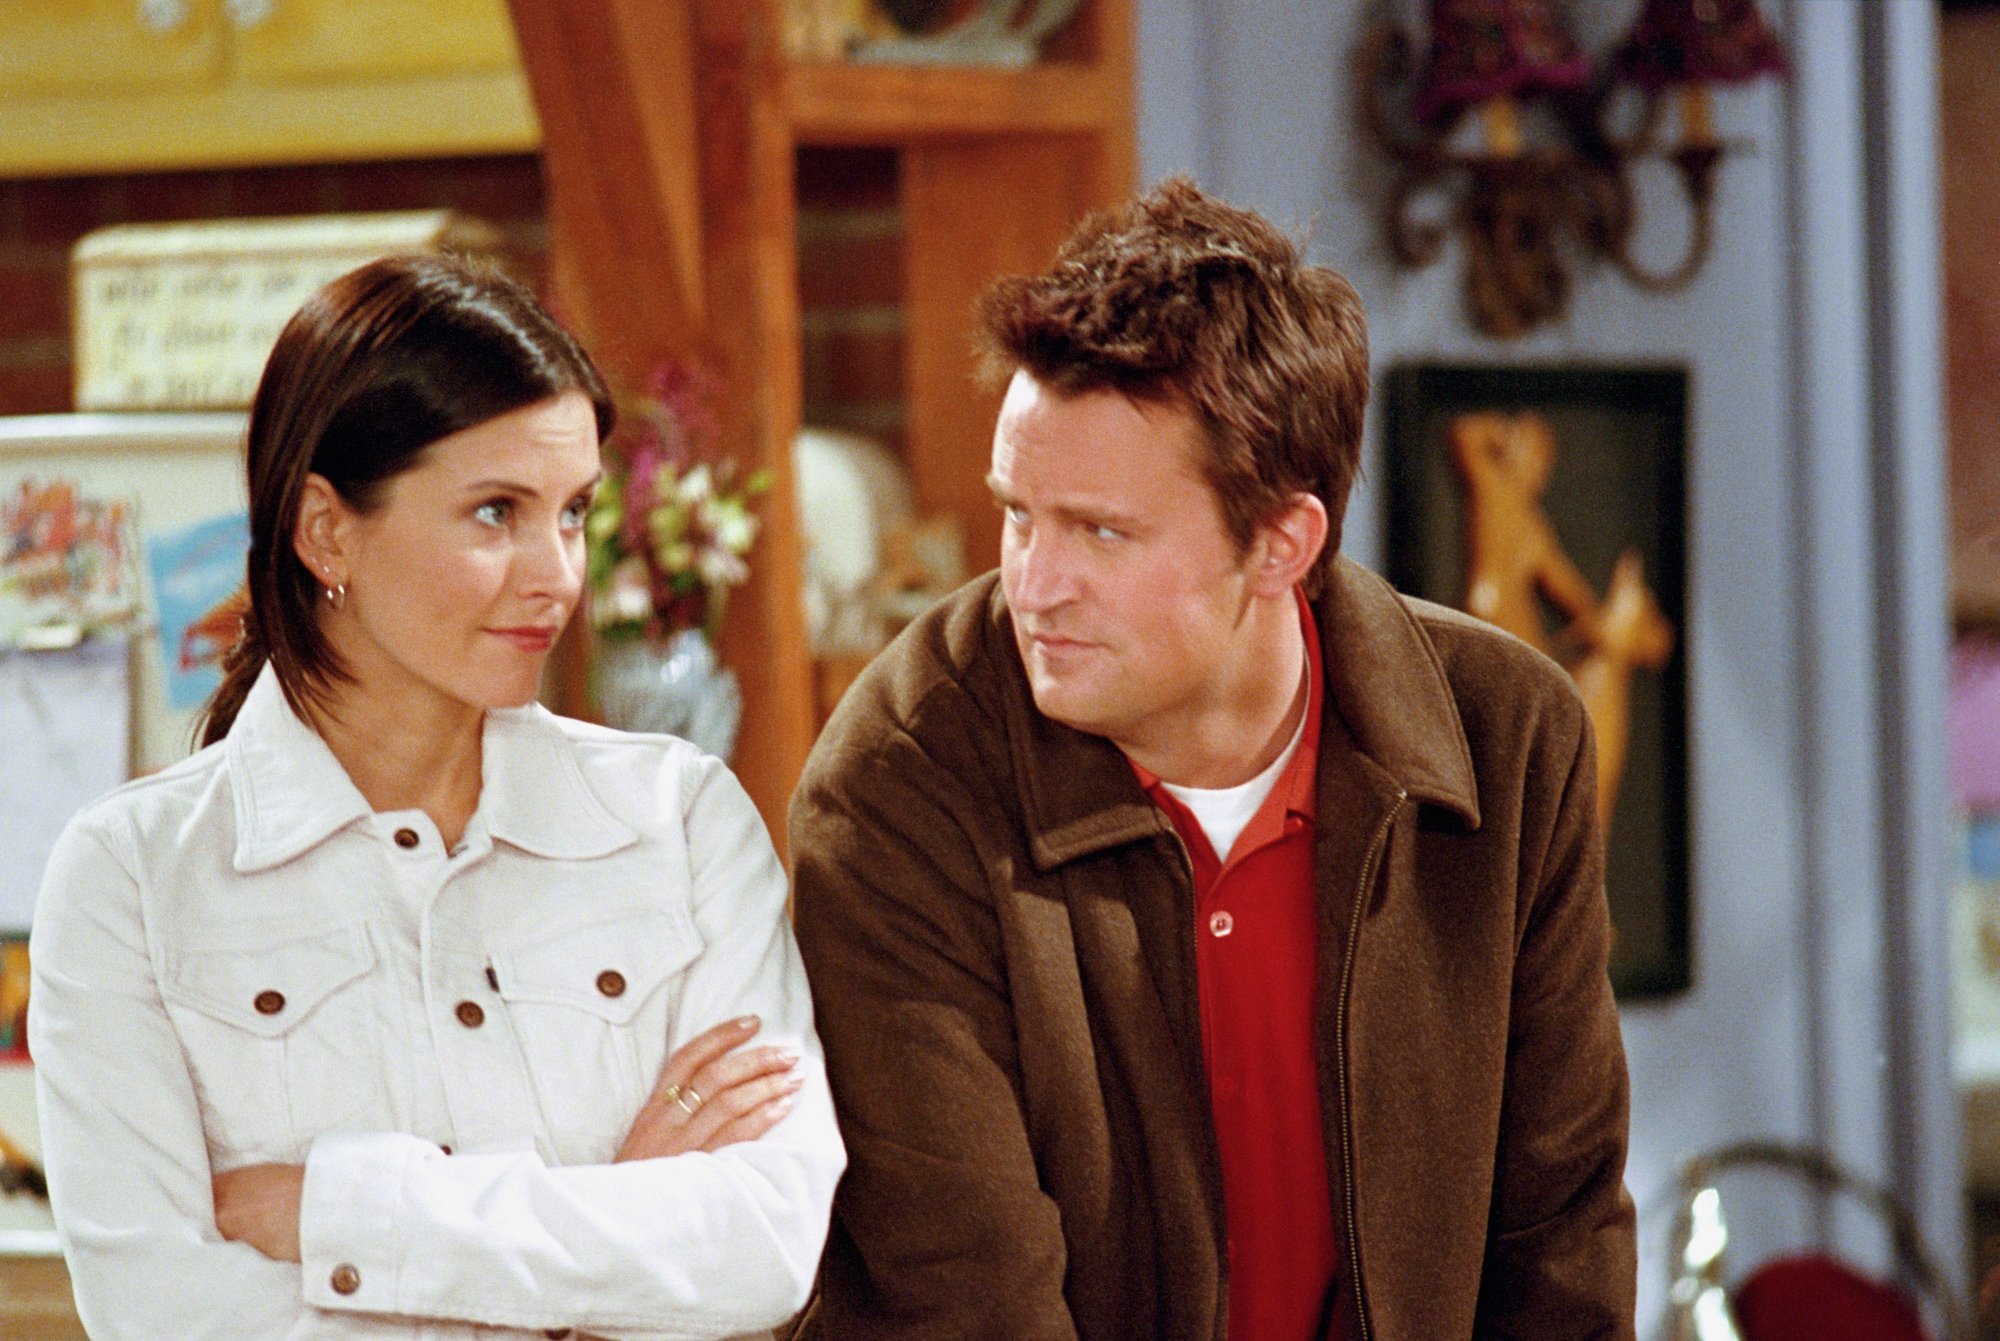 'Friends' Courteney Cox as Monica and Matthew Perry as Chandler. Monica is wearing a white jacket and crossing her arms. Chandler is wearing a brown jacket and a red shirt underneath looking at Monica.